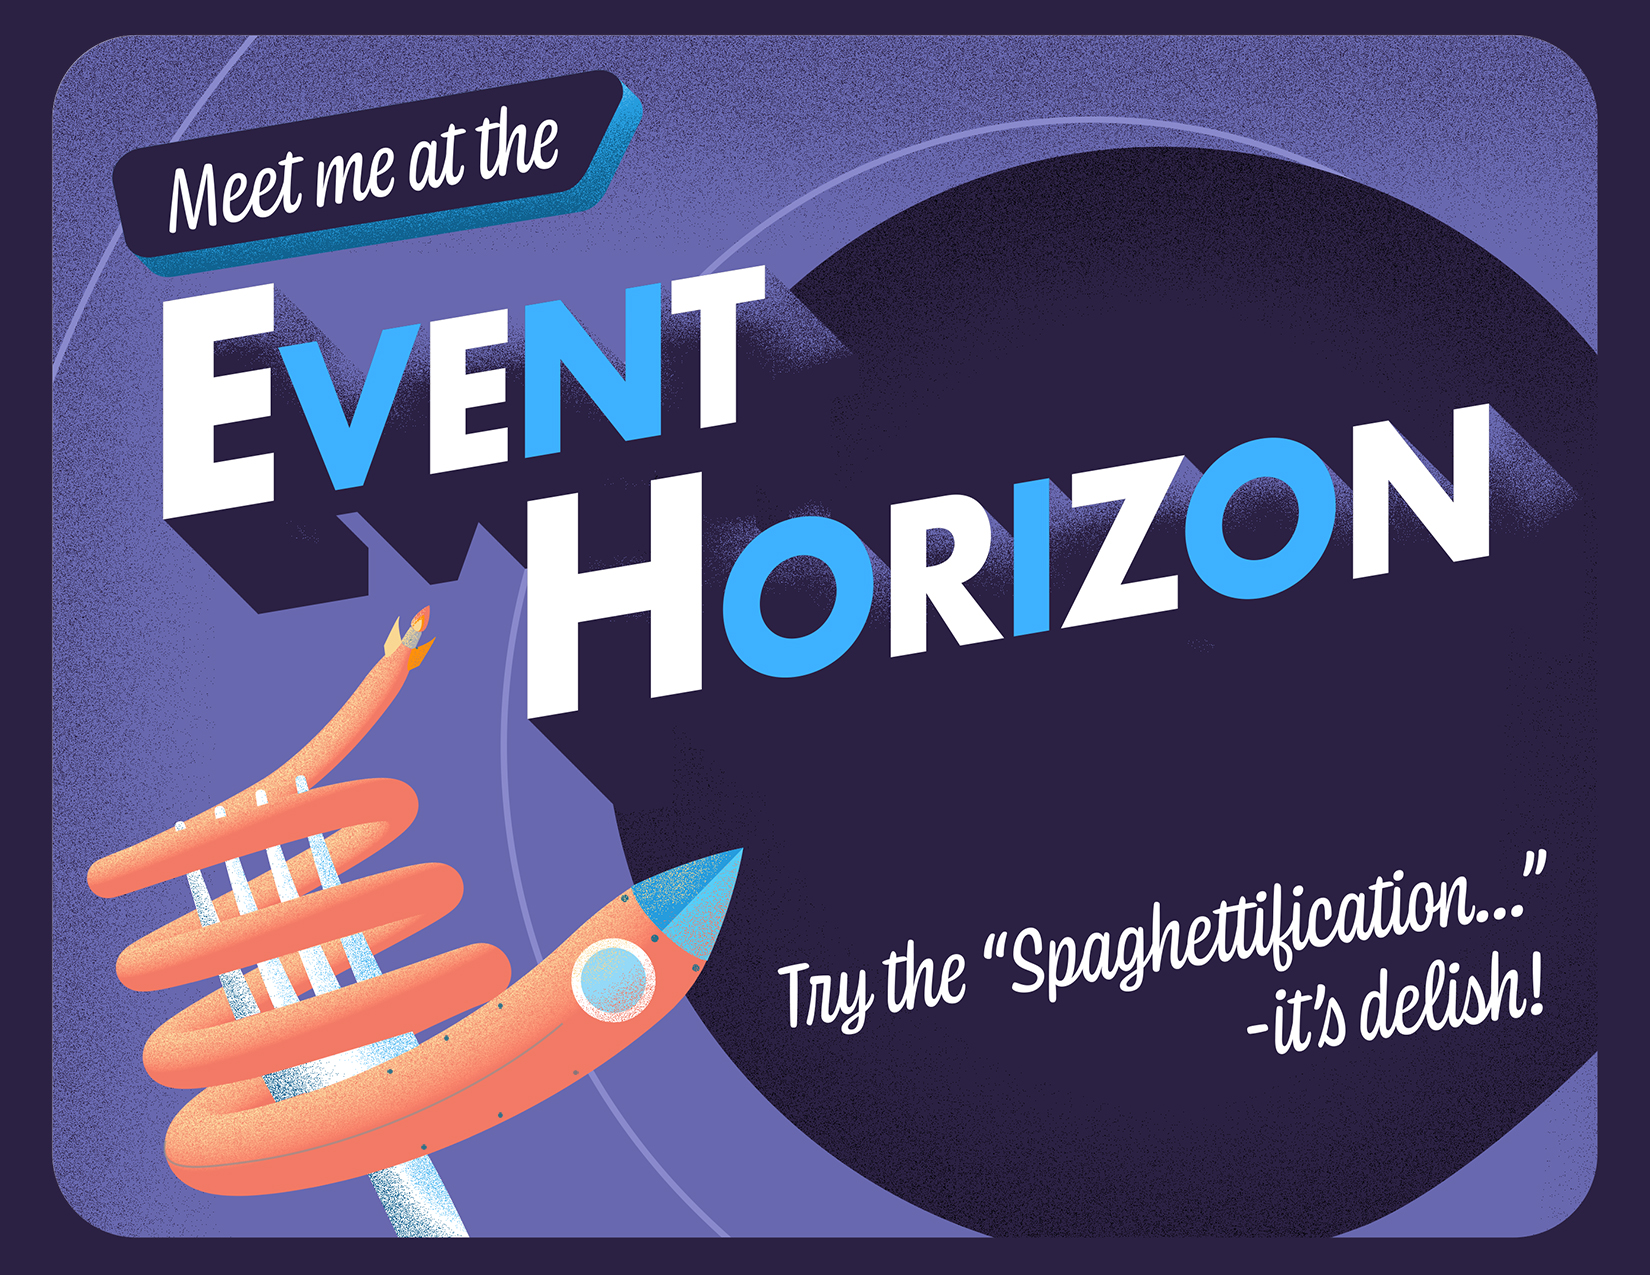 This card features a large dark purple circle taking up most of the right side, spilling off the edges. Next to it, on the left, is a large fork with a red rocket ship spiraled around its tines. Text across the center of the card in a retro font and reads: “Meet me at the Event Horizon. Try the ‘Spaghettification…’ - it’s delish!”